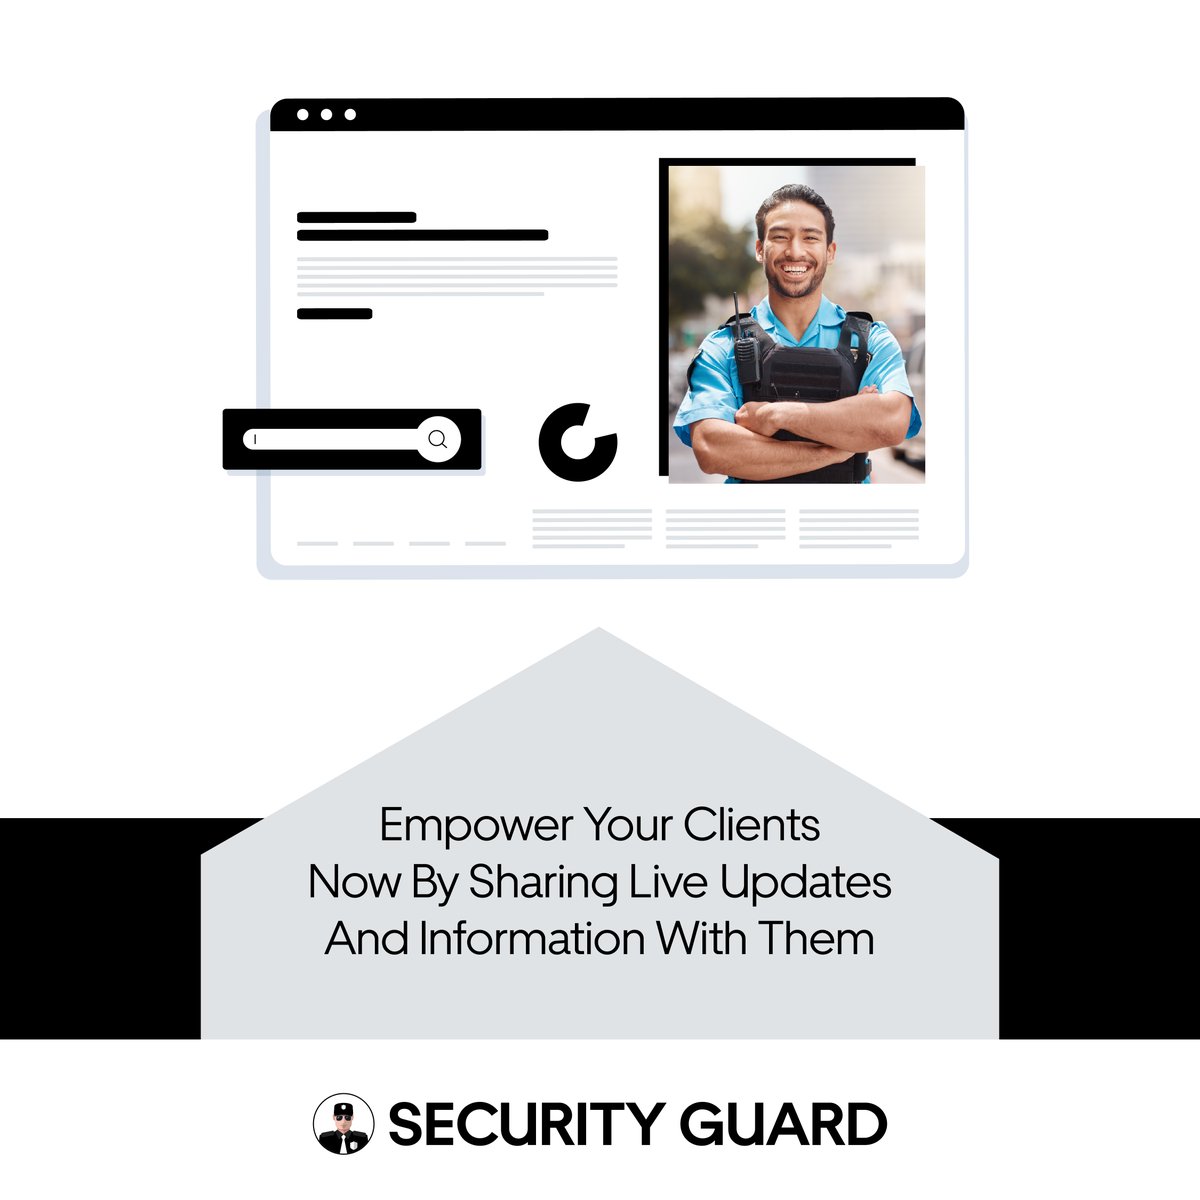 Using #SecurityGuardApp ensure your clients have instant access to all crucial data. Facilitate convenient access to well-structured reports. Prevent any incidents on their property from being overlooked.Allow them to view & analyze time logs in real-time. securityguard.app/time-clock